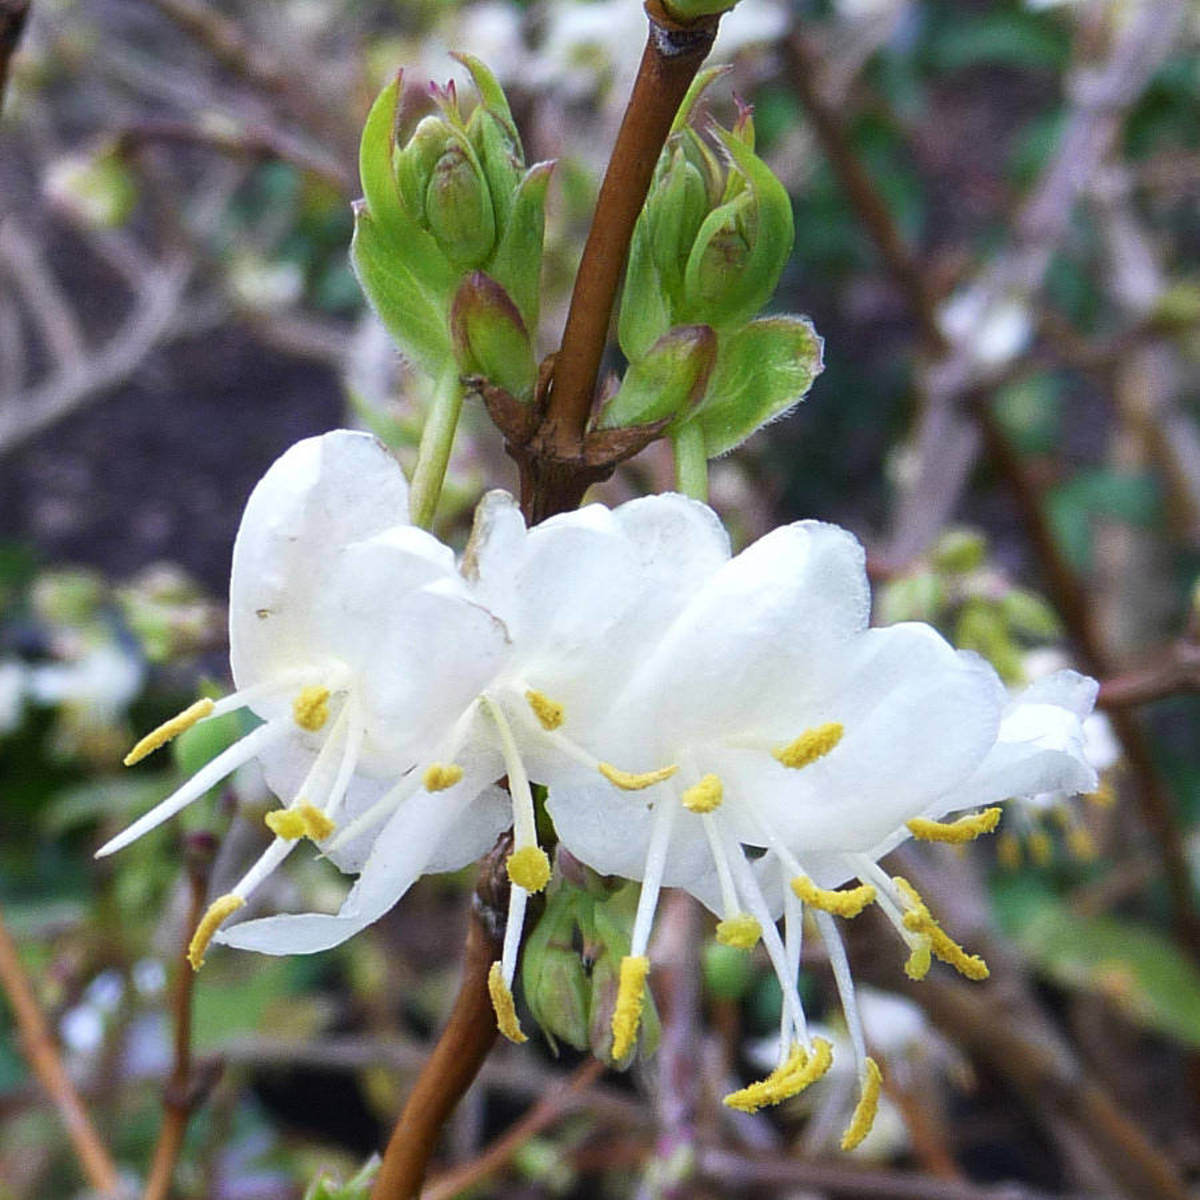 Bringing Sweet Aroma to Winter: Discover the Beauty of Winter Honeysuckle